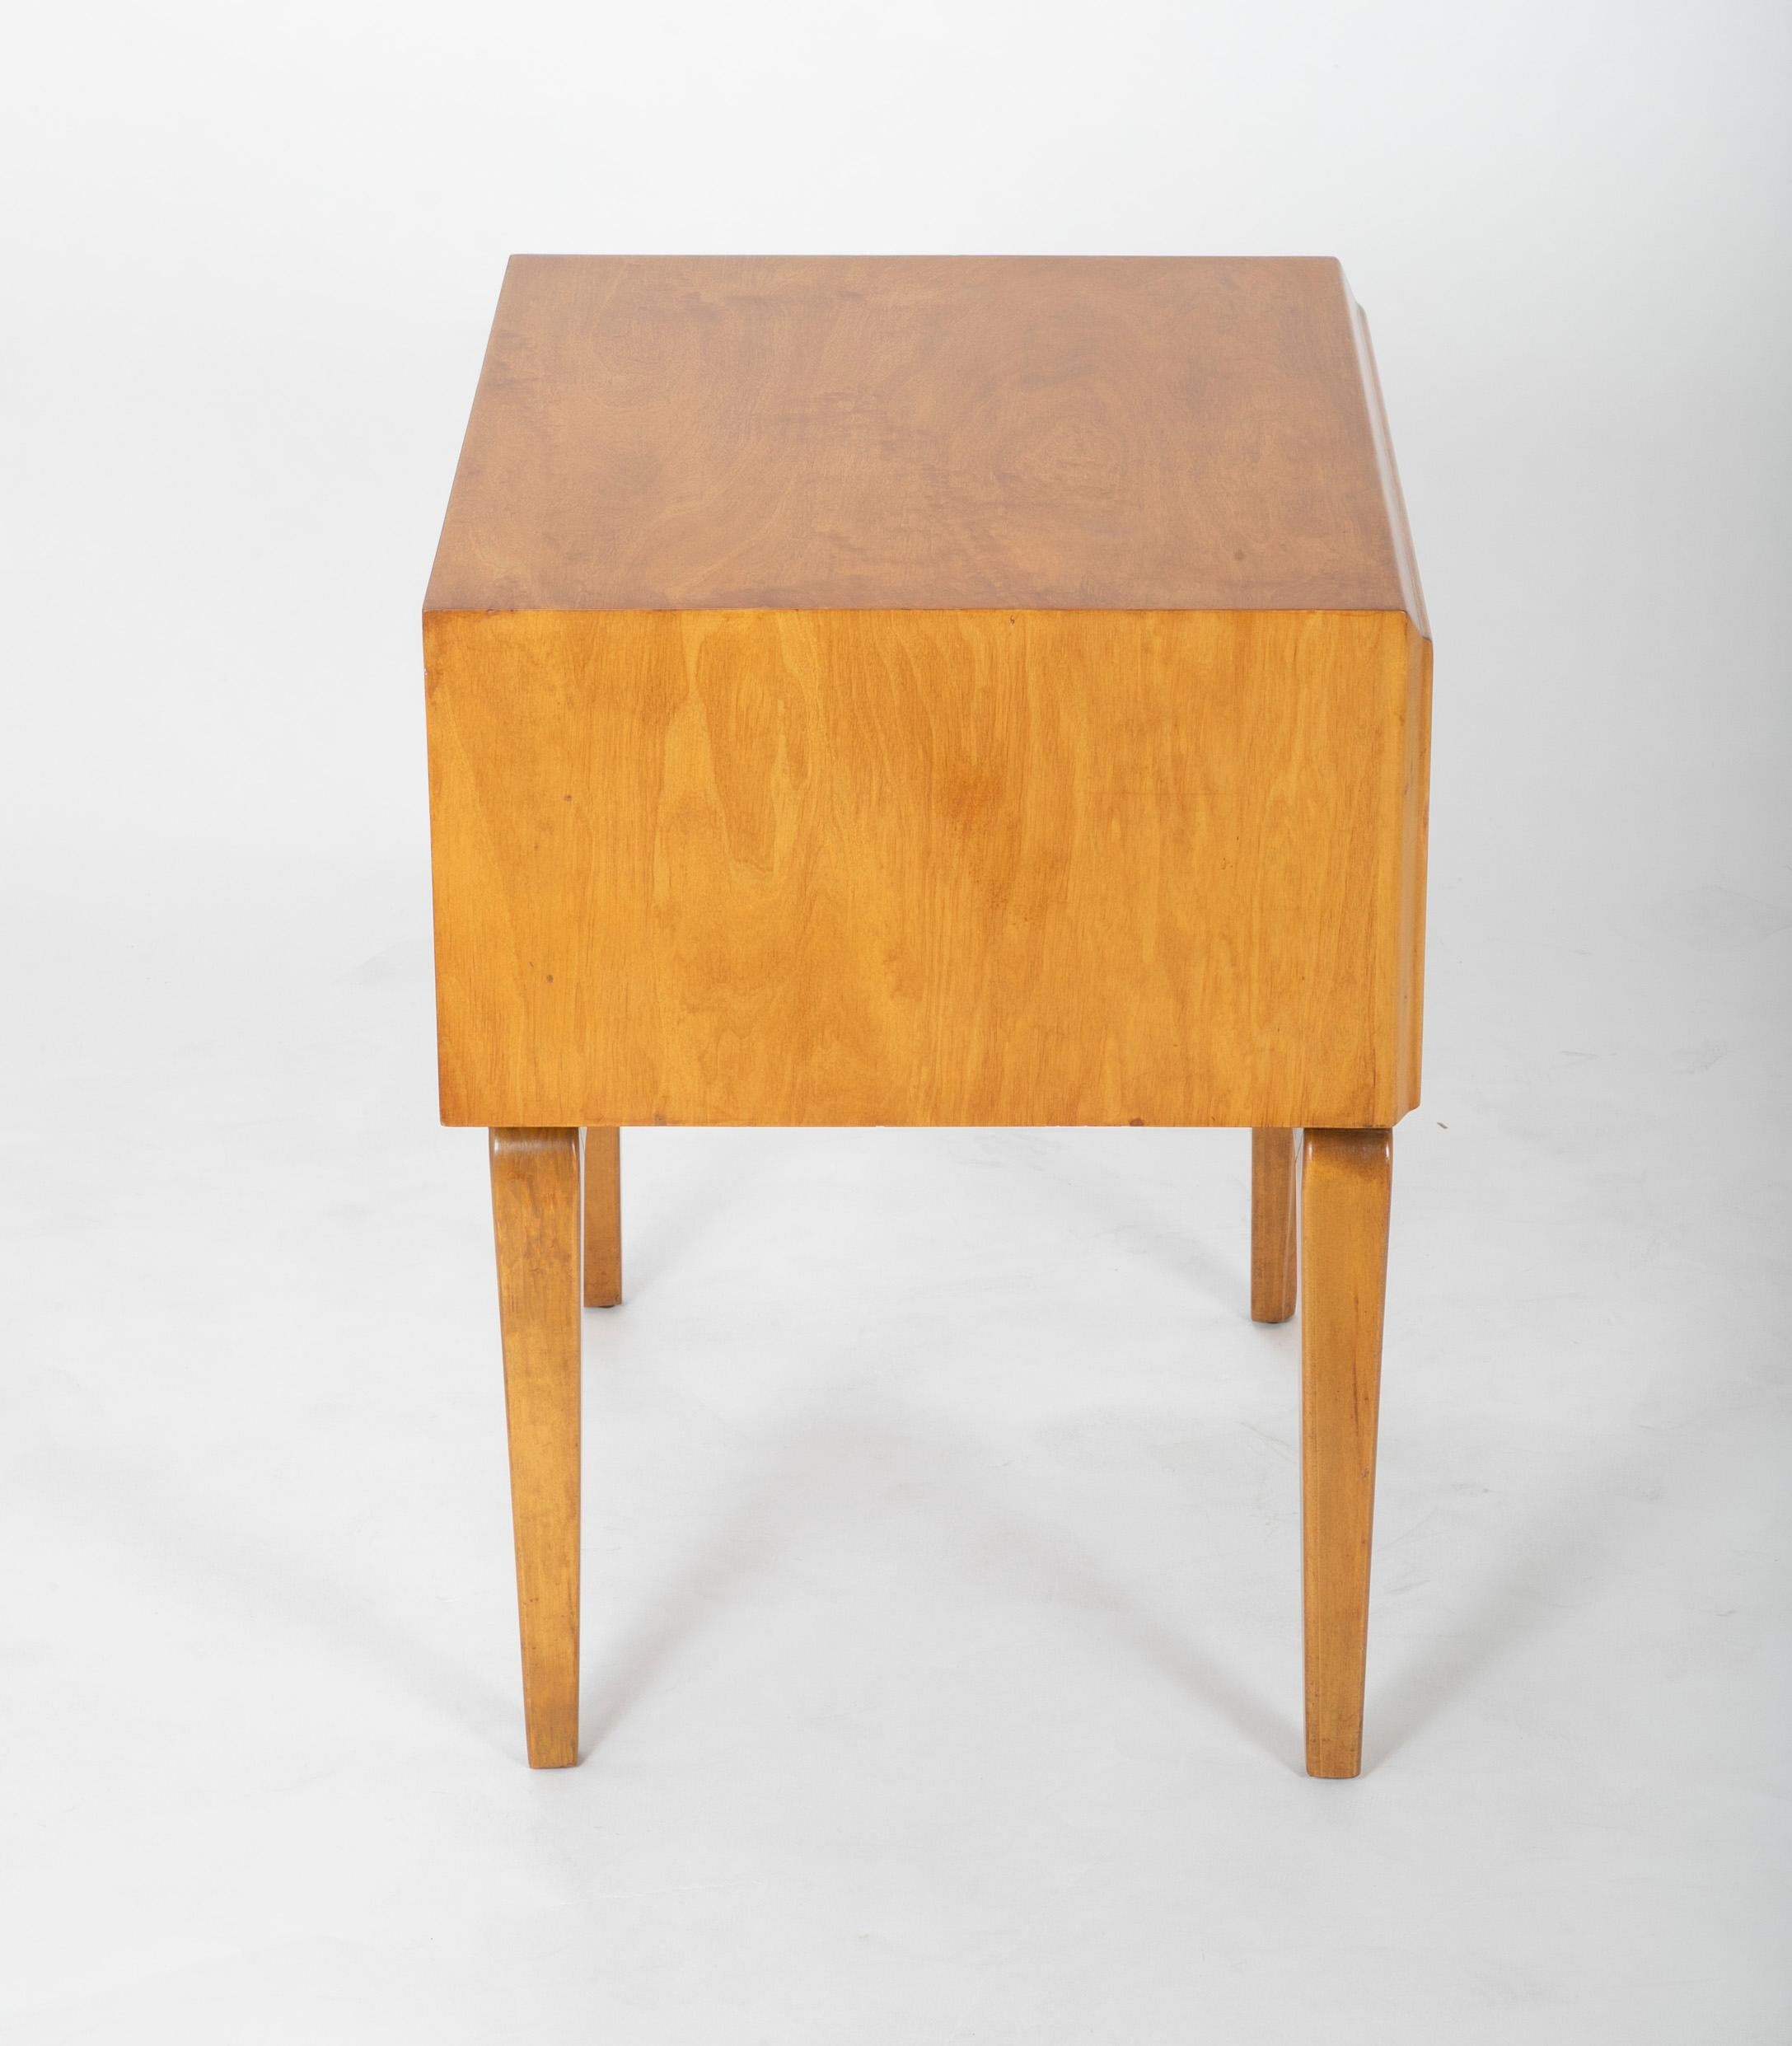 Pair of Maple Side Tables Designed by Edmond Spence 1